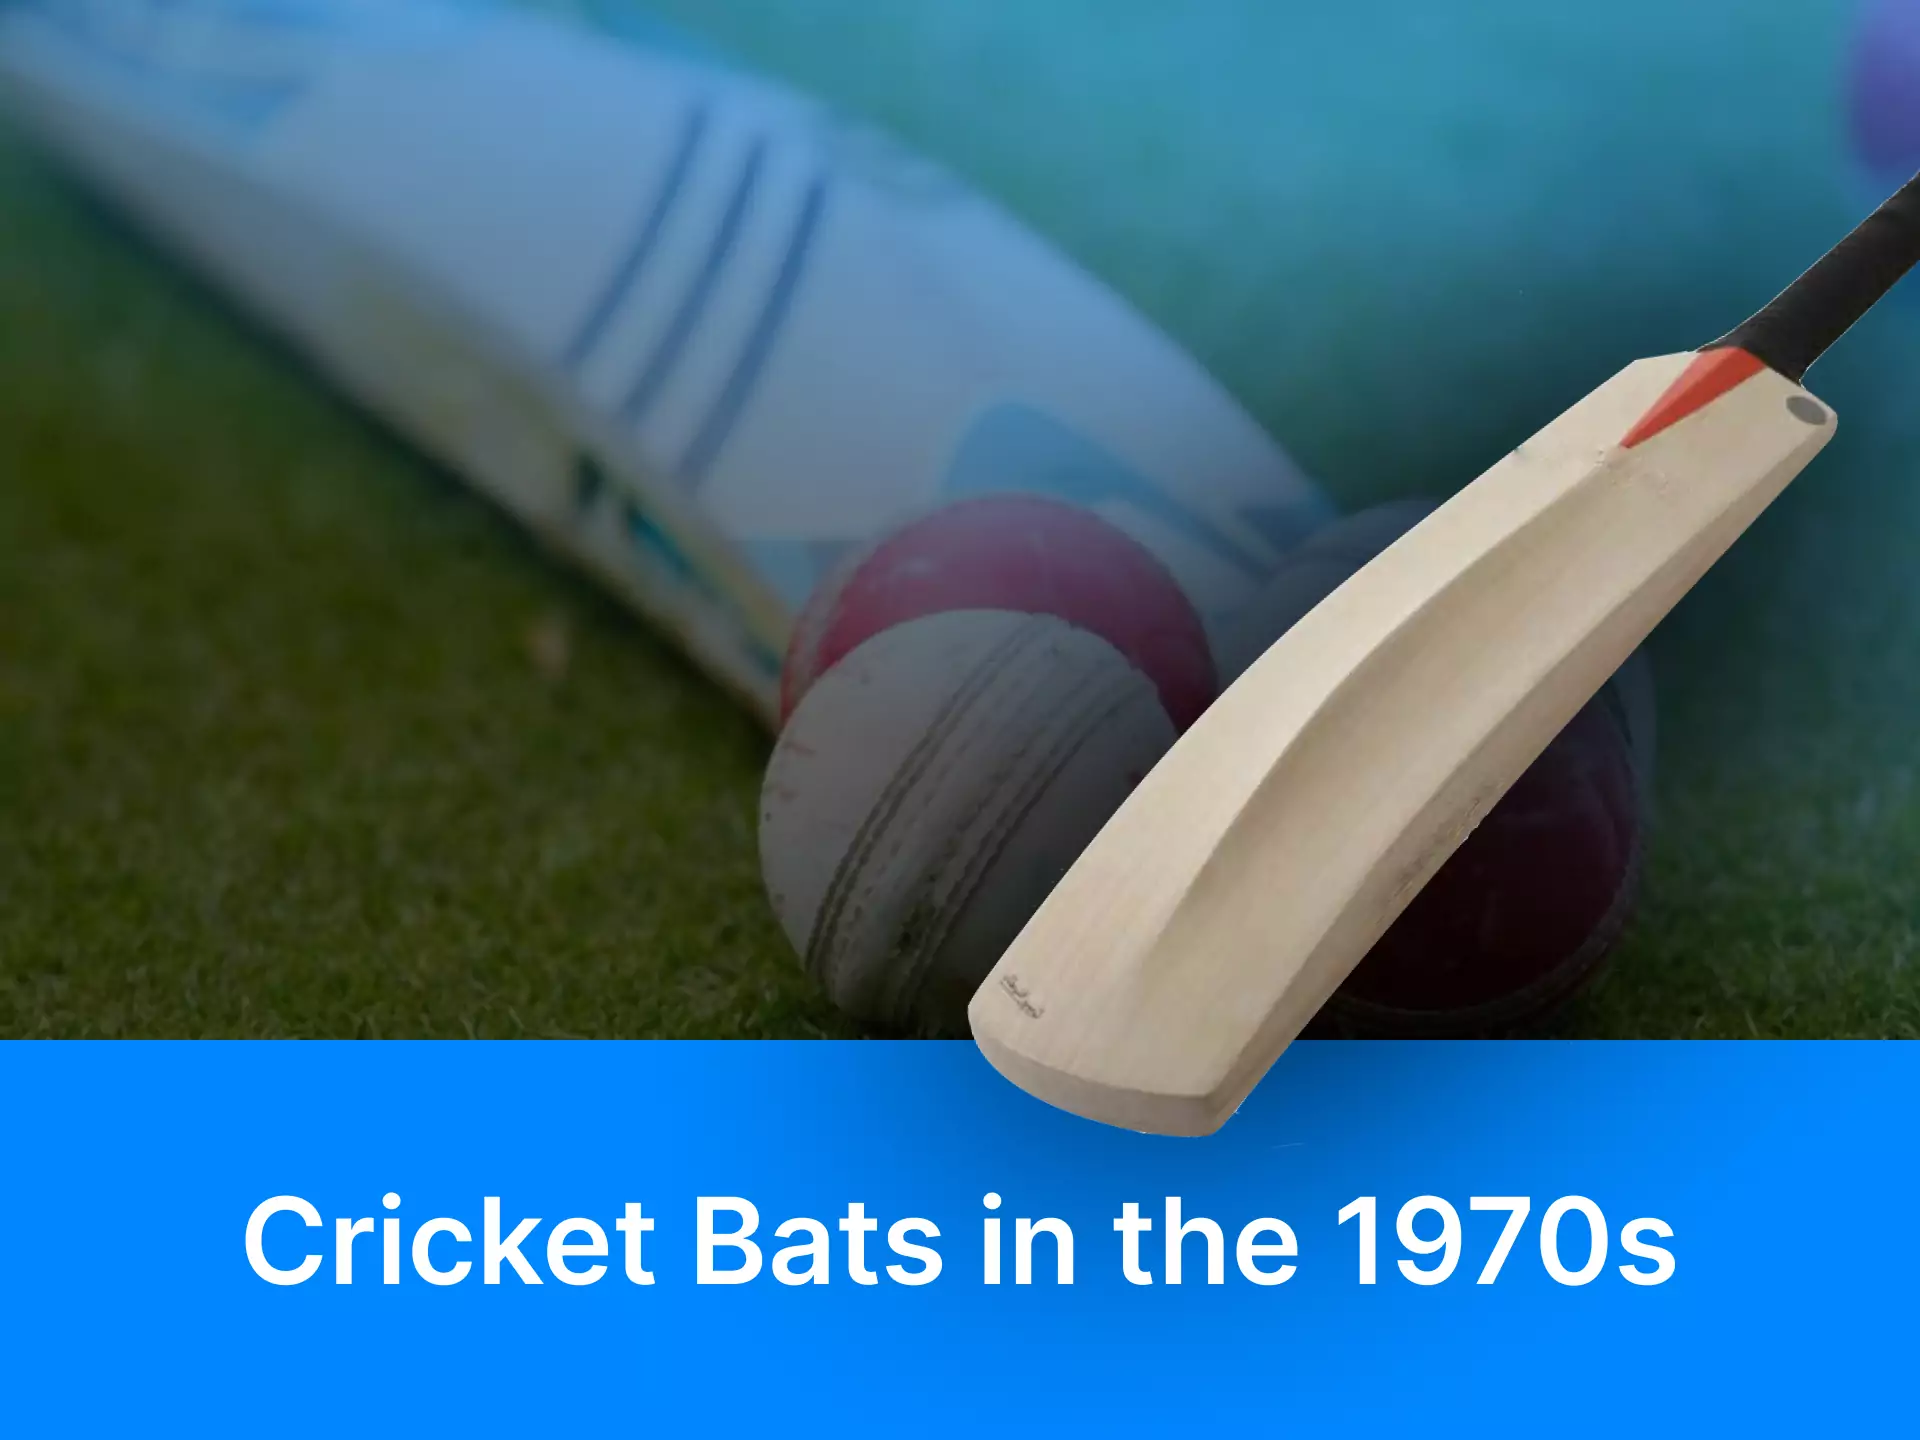 What cricket bats were like in the 1970s.